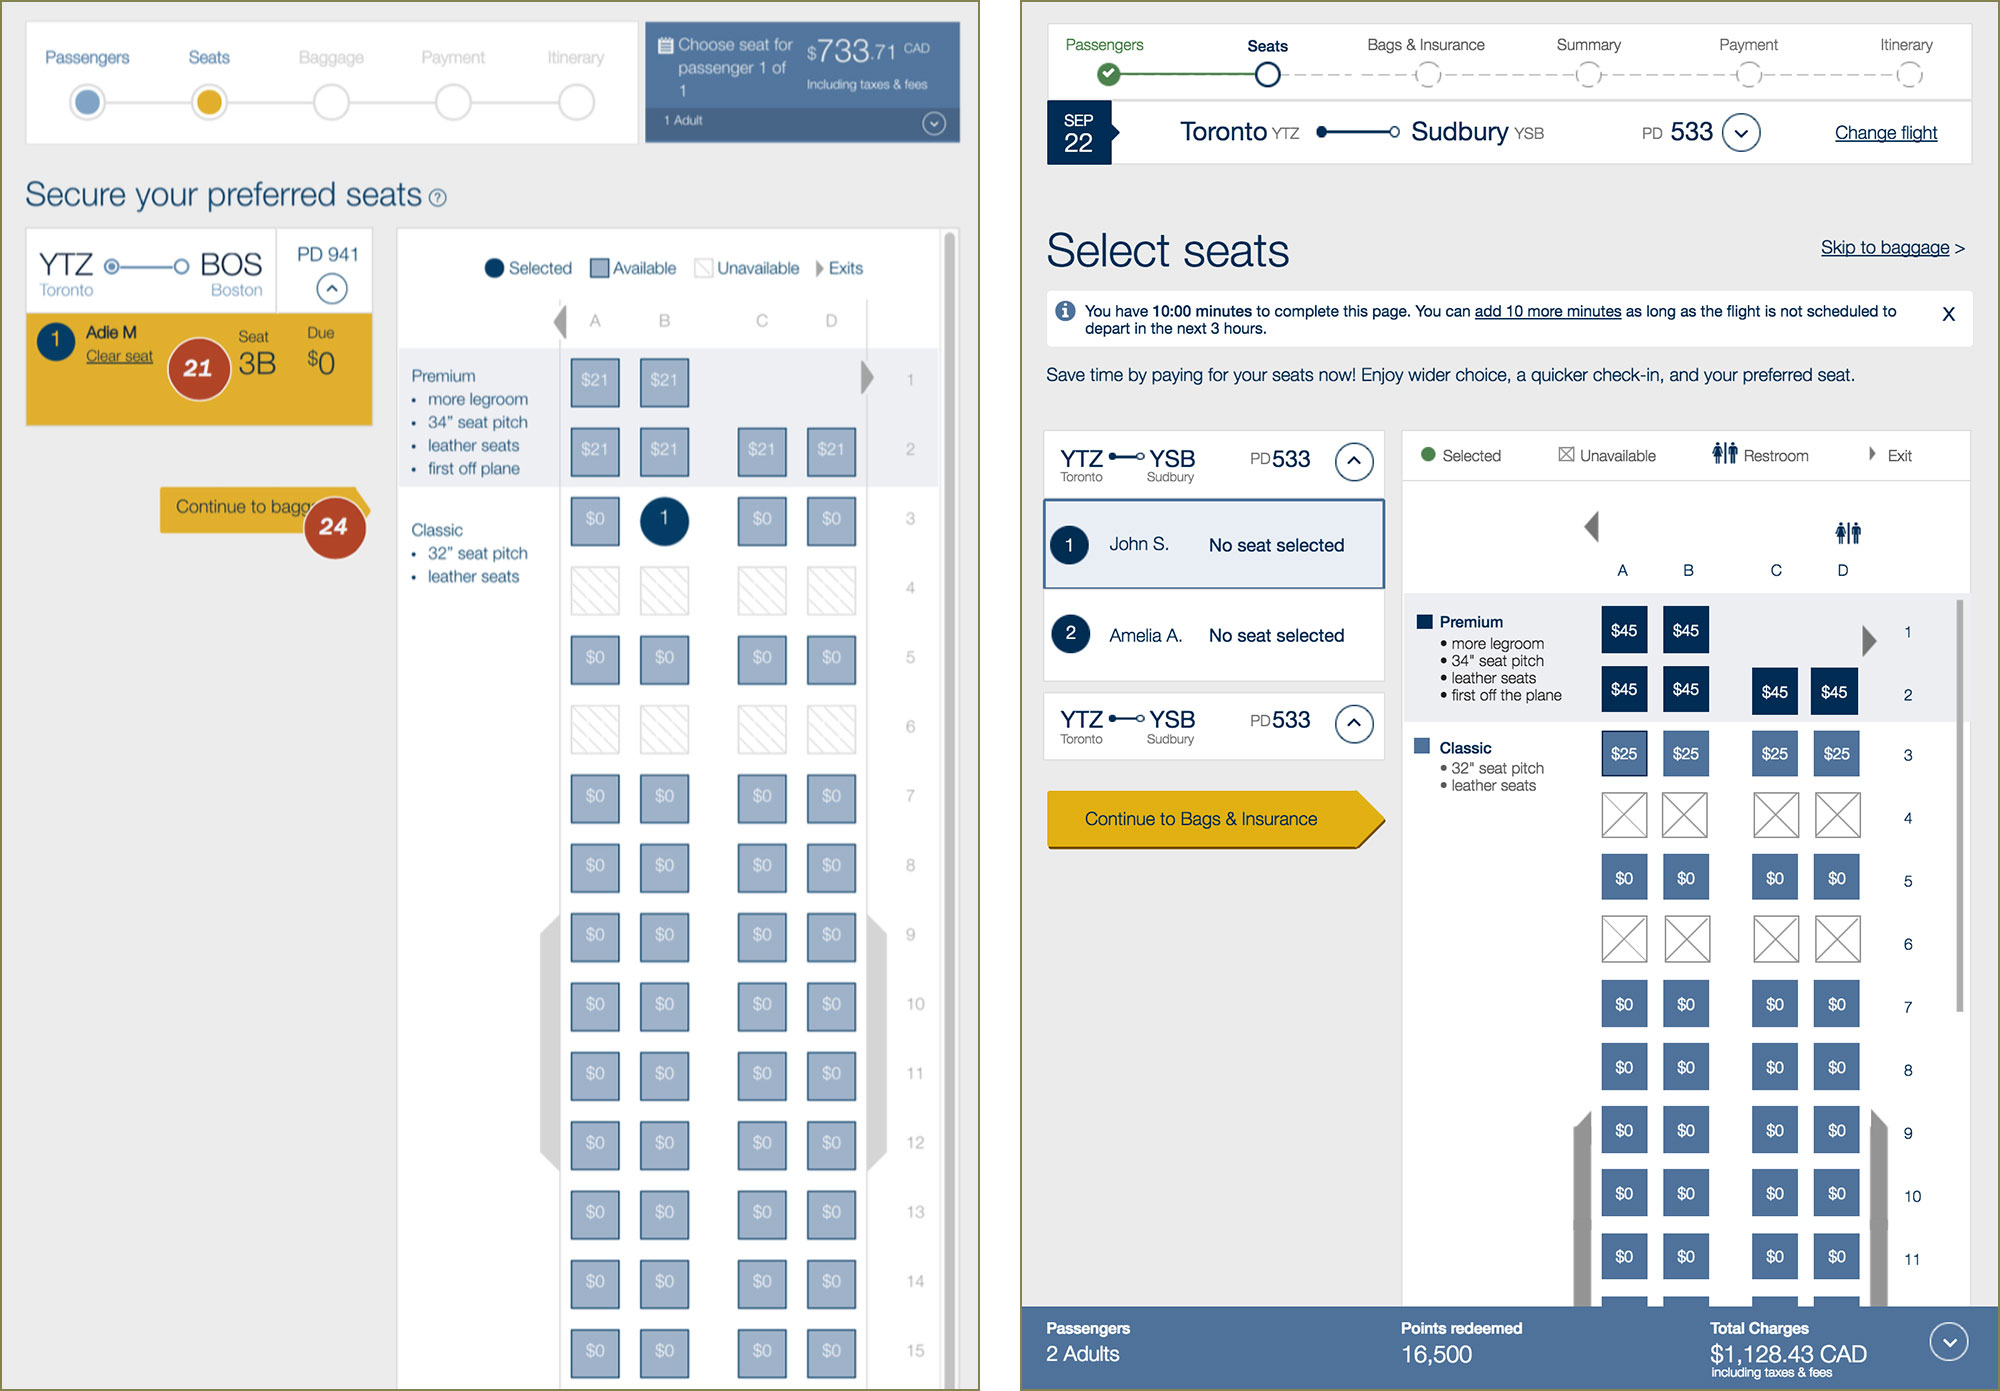 Screenshots of the airline's original seat selection page and the accessibility revisions.